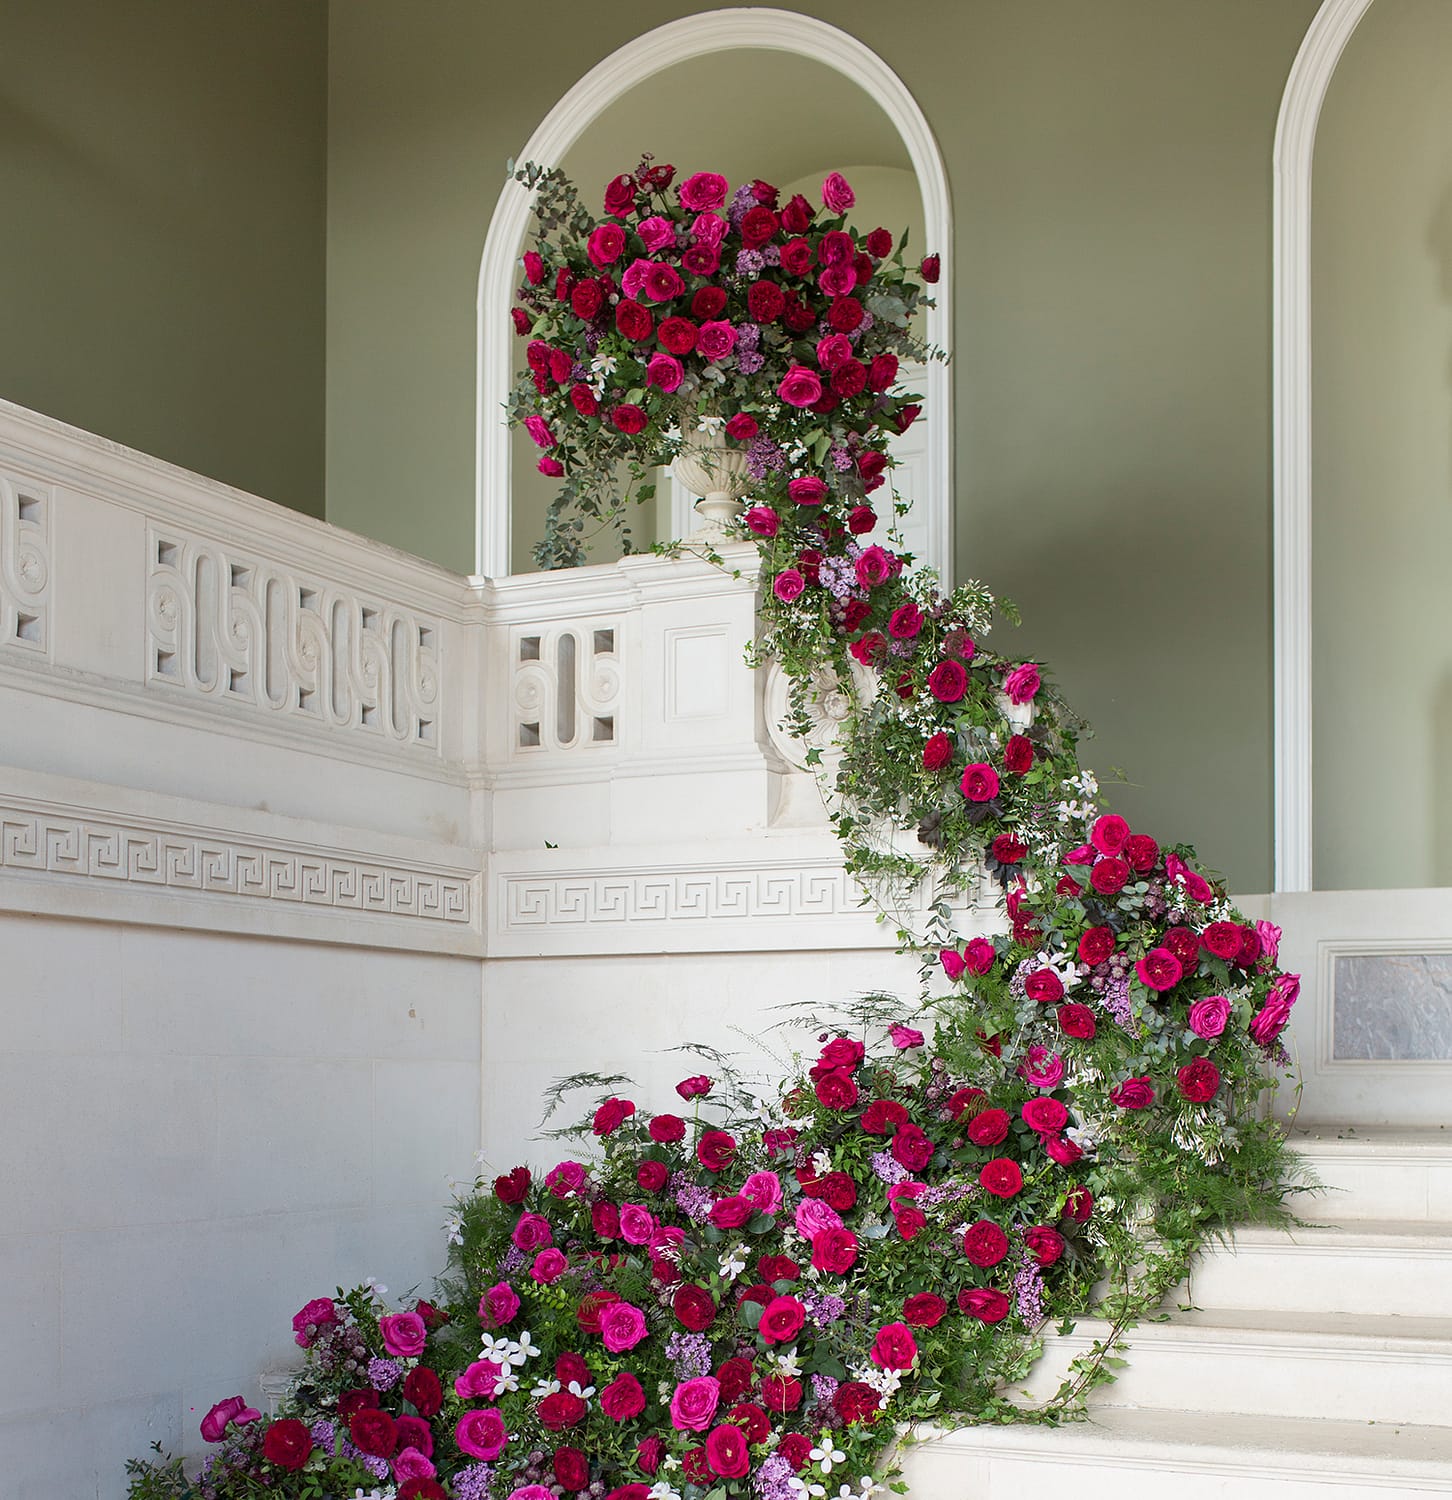 Capability roses staircase installation wedding